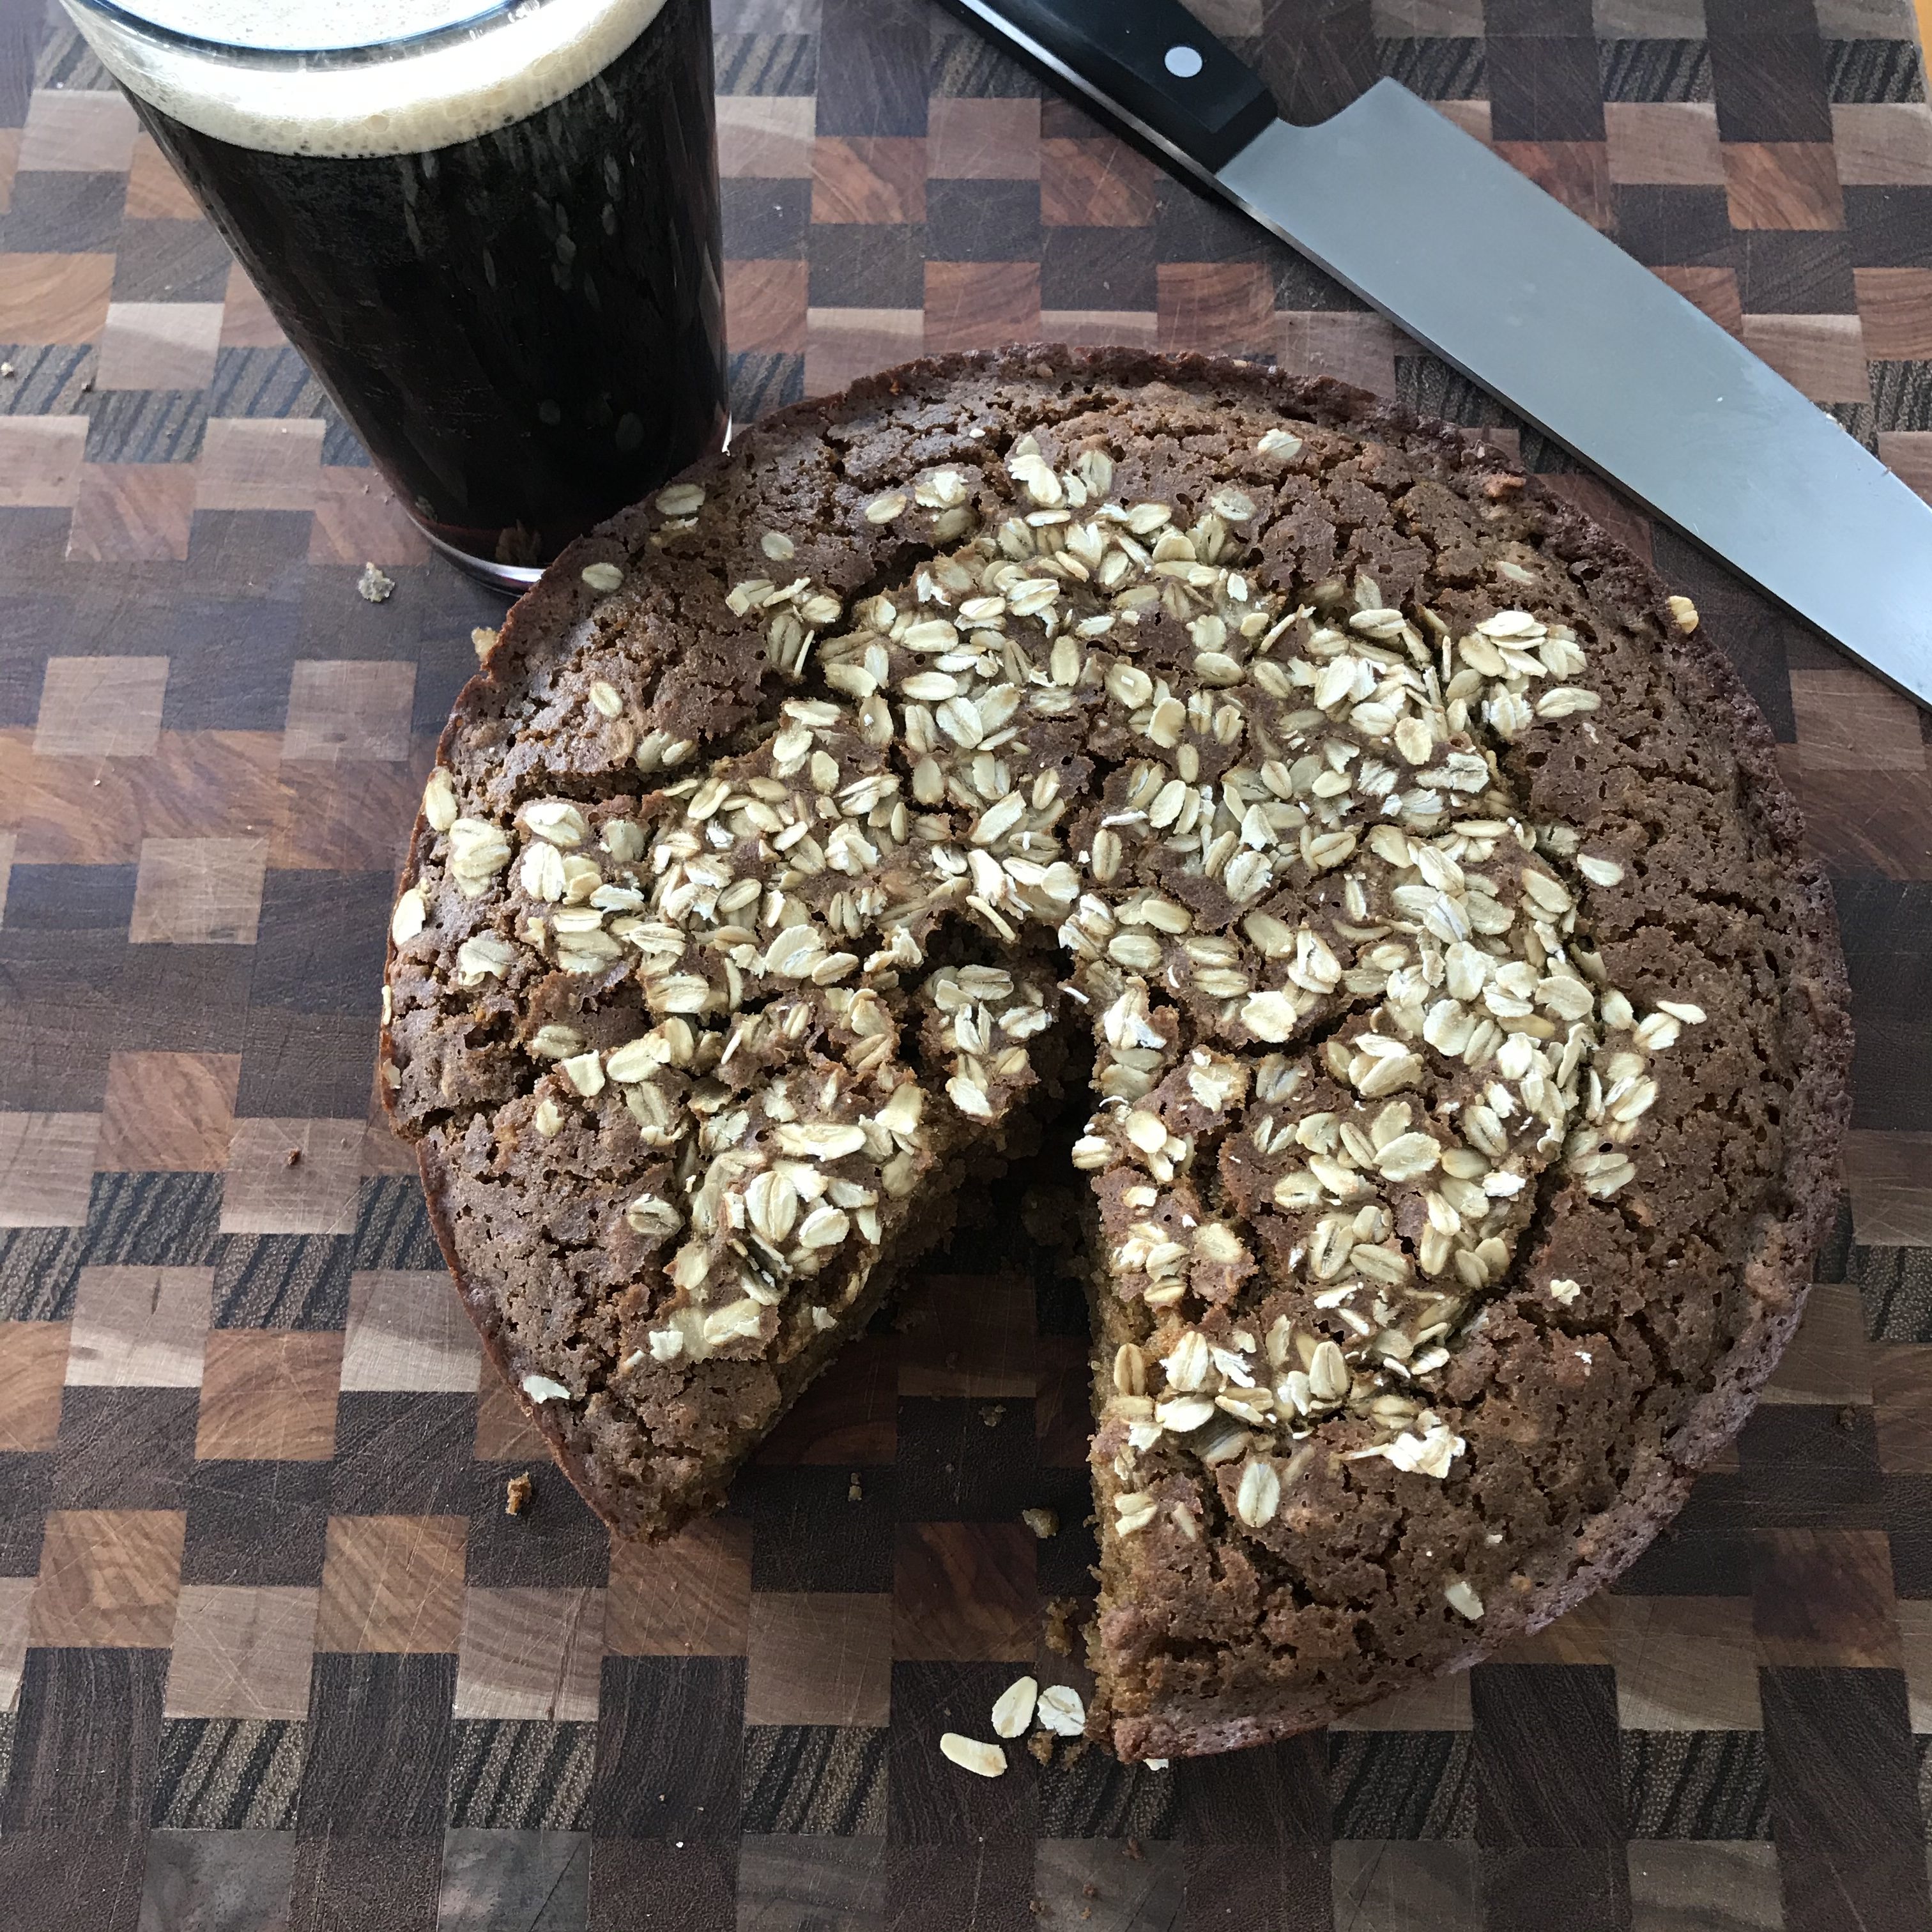 A slice of pie on a cutting board next to a glass of beer, perfect for celebrating St. Patrick's Day.